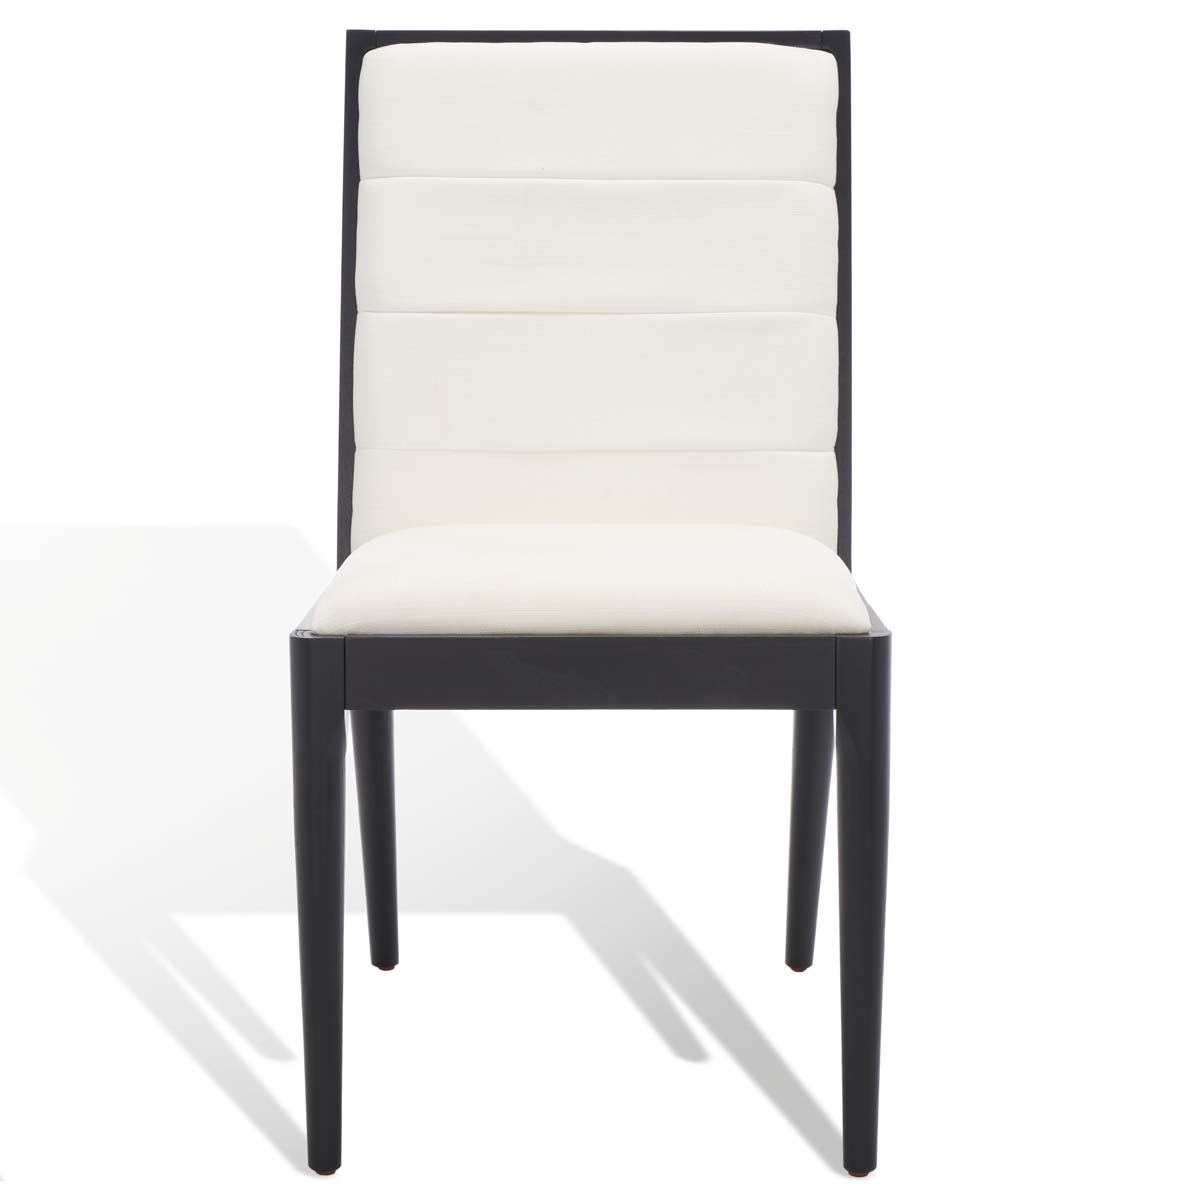 Safavieh Couture Laycee Dining Chair - Black / White